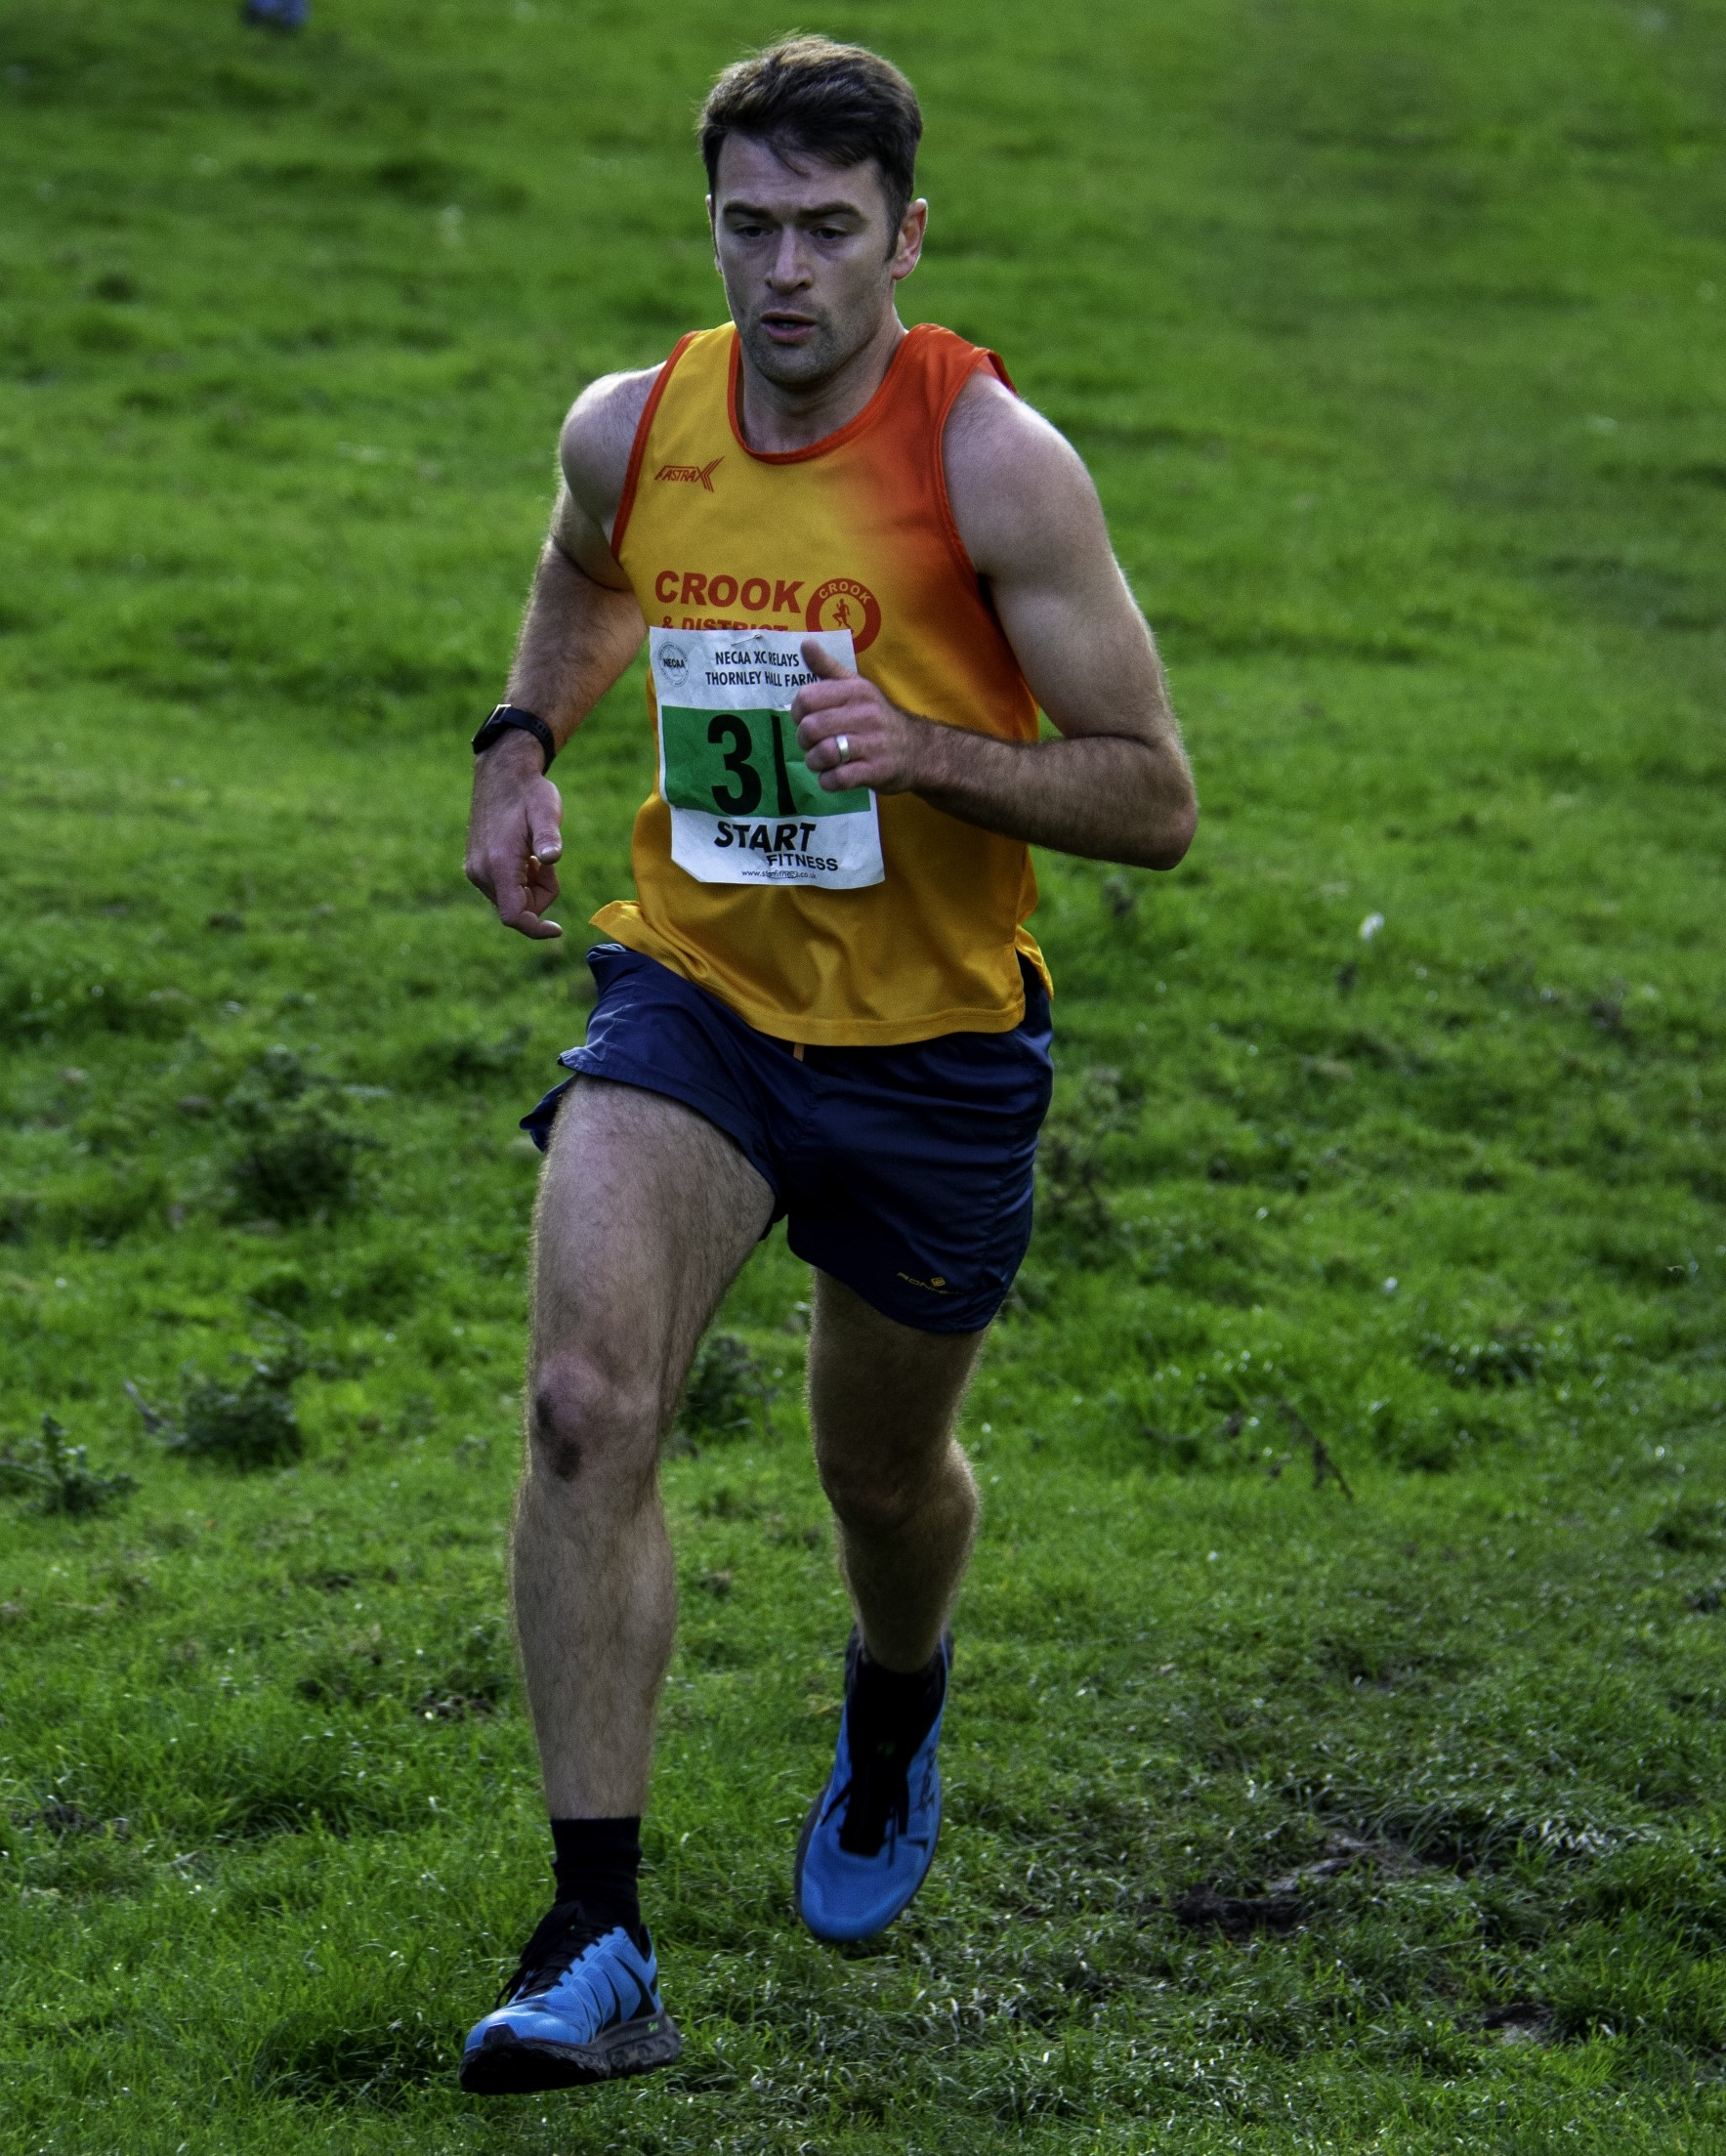 Chris Henderson - Running in the cross country relays